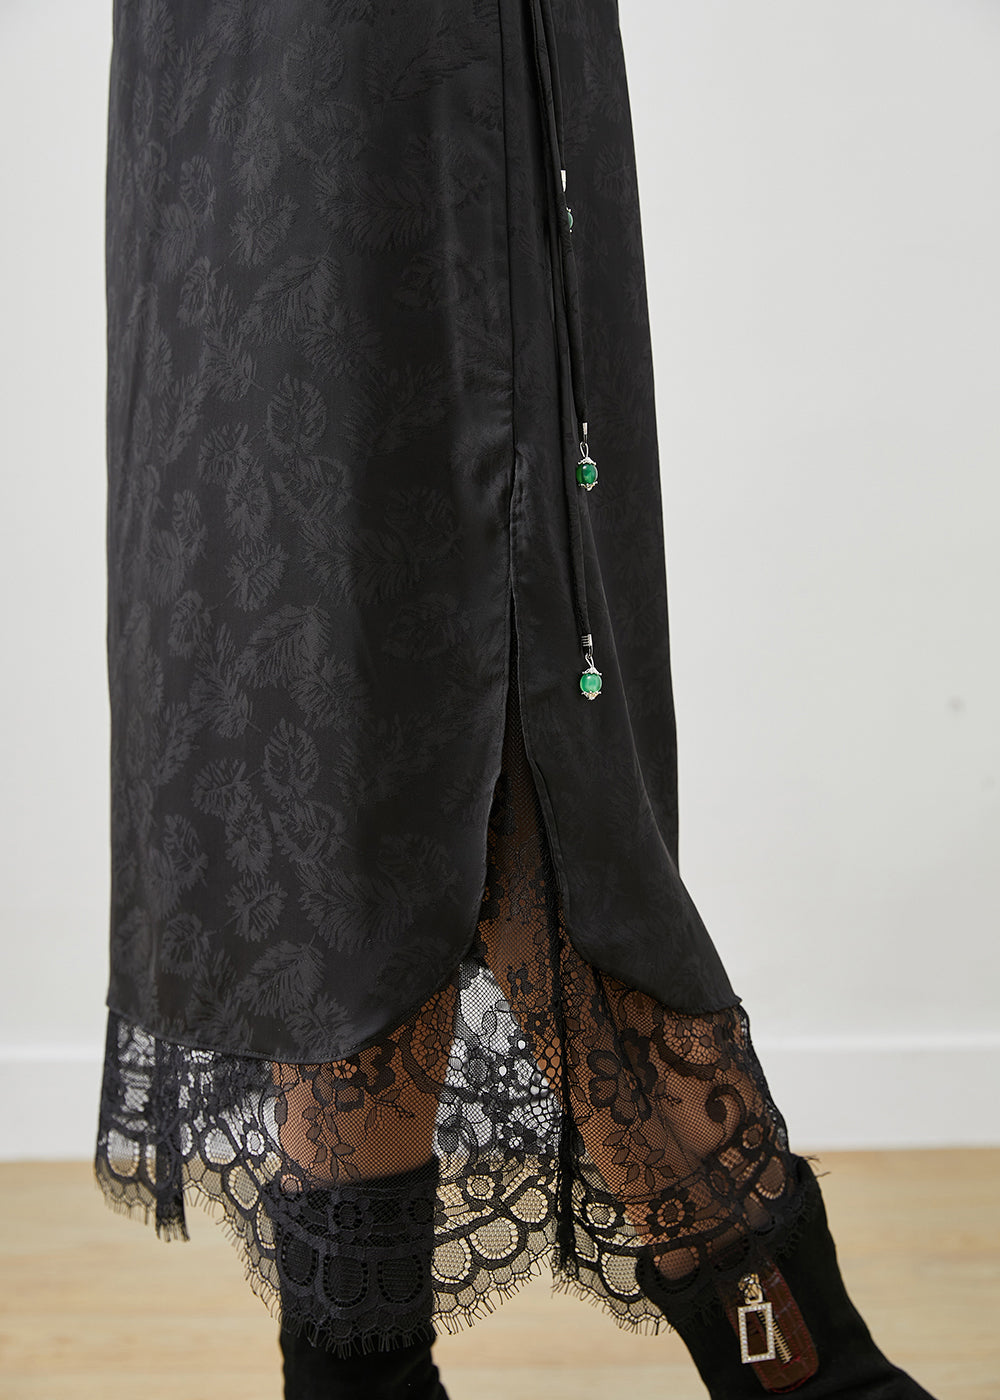 French Black Tasseled Patchwork Lace Silk Skirt Fall